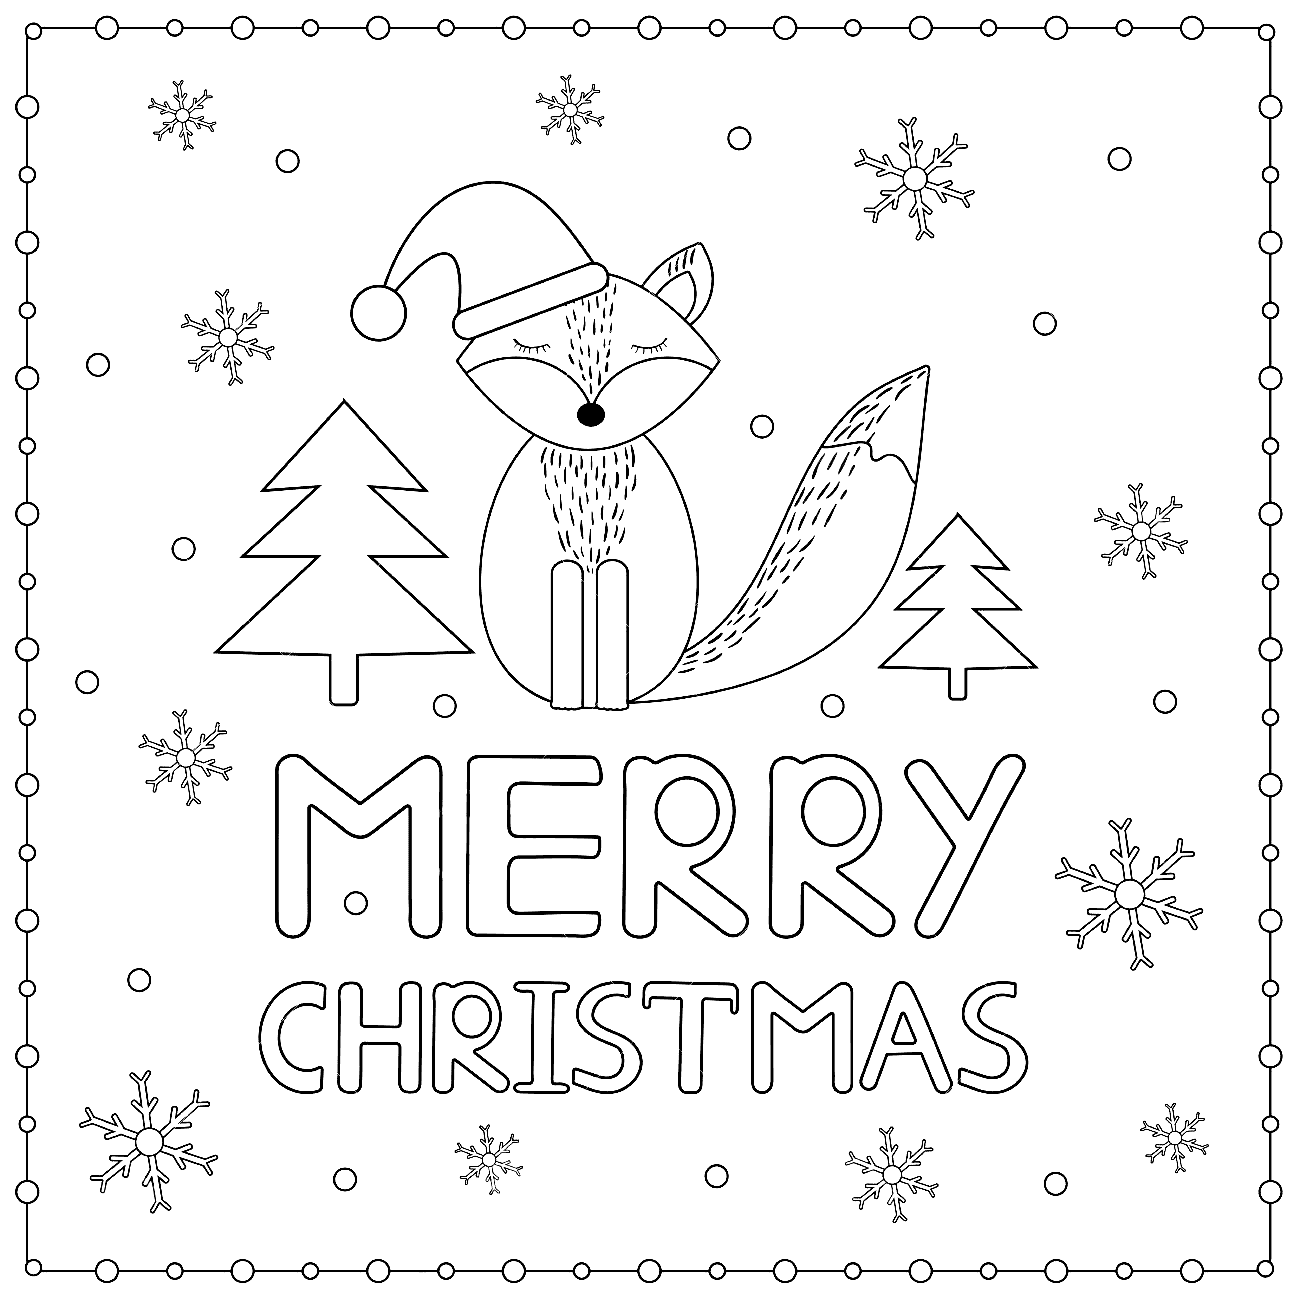 Merry Christmas Card With Snowflakes And Fox Coloring Page